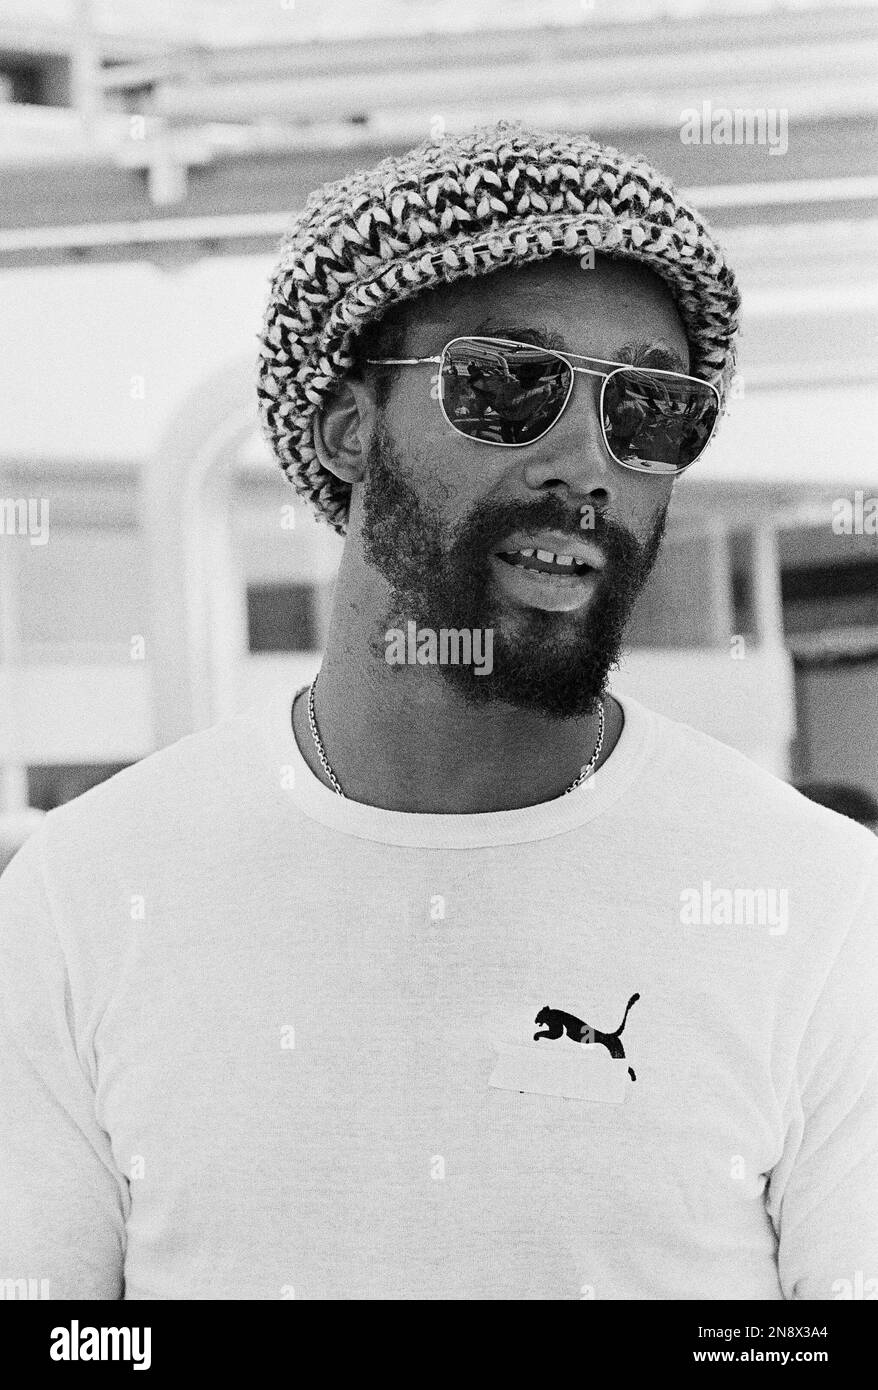 John Carlos, American gold medal sprinter from 1968 Mexico Olympics, wears a t-shirt advertising the "Puma" brand of track shoes, but the "Puma" name taped over, in Olympic village after officials